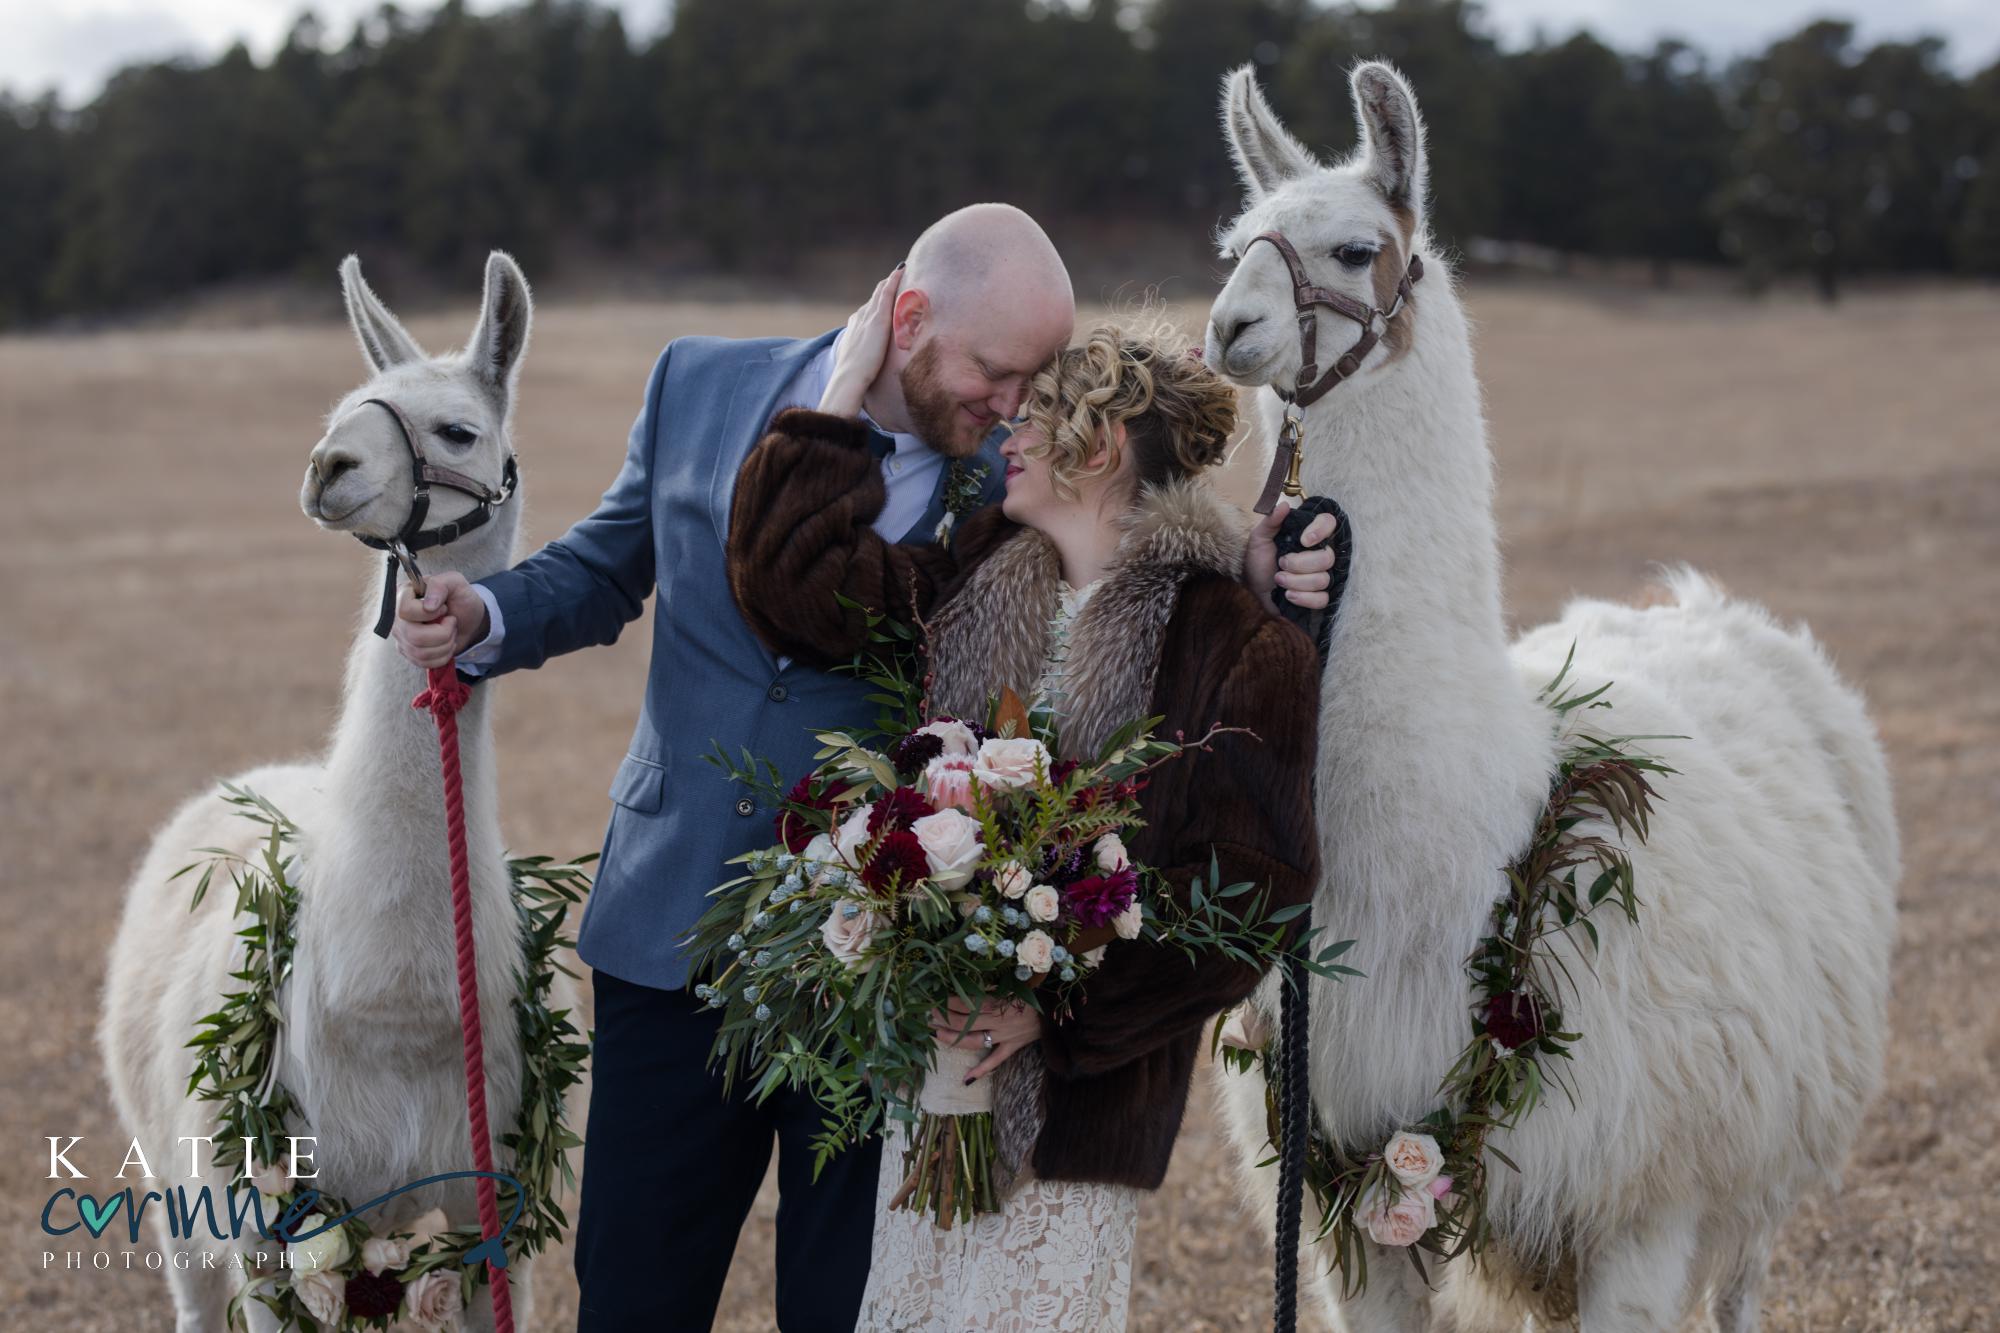 Couple in wedding dress and suit kiss in Colorado Springs